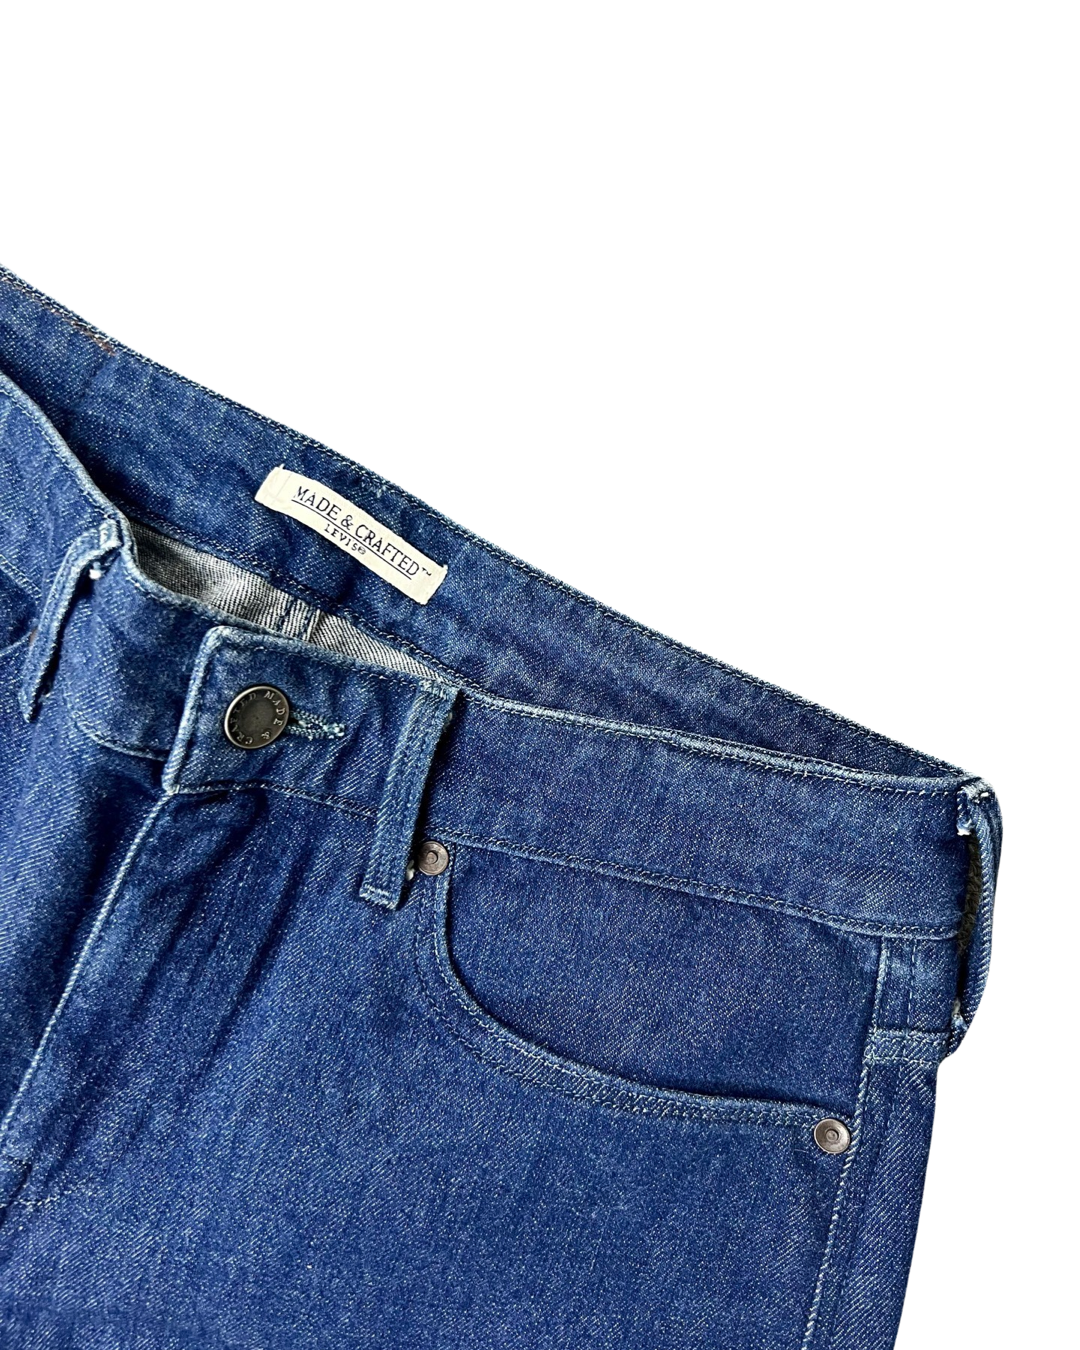 Levi's Vintage Made & Crafted Stitch Jeans